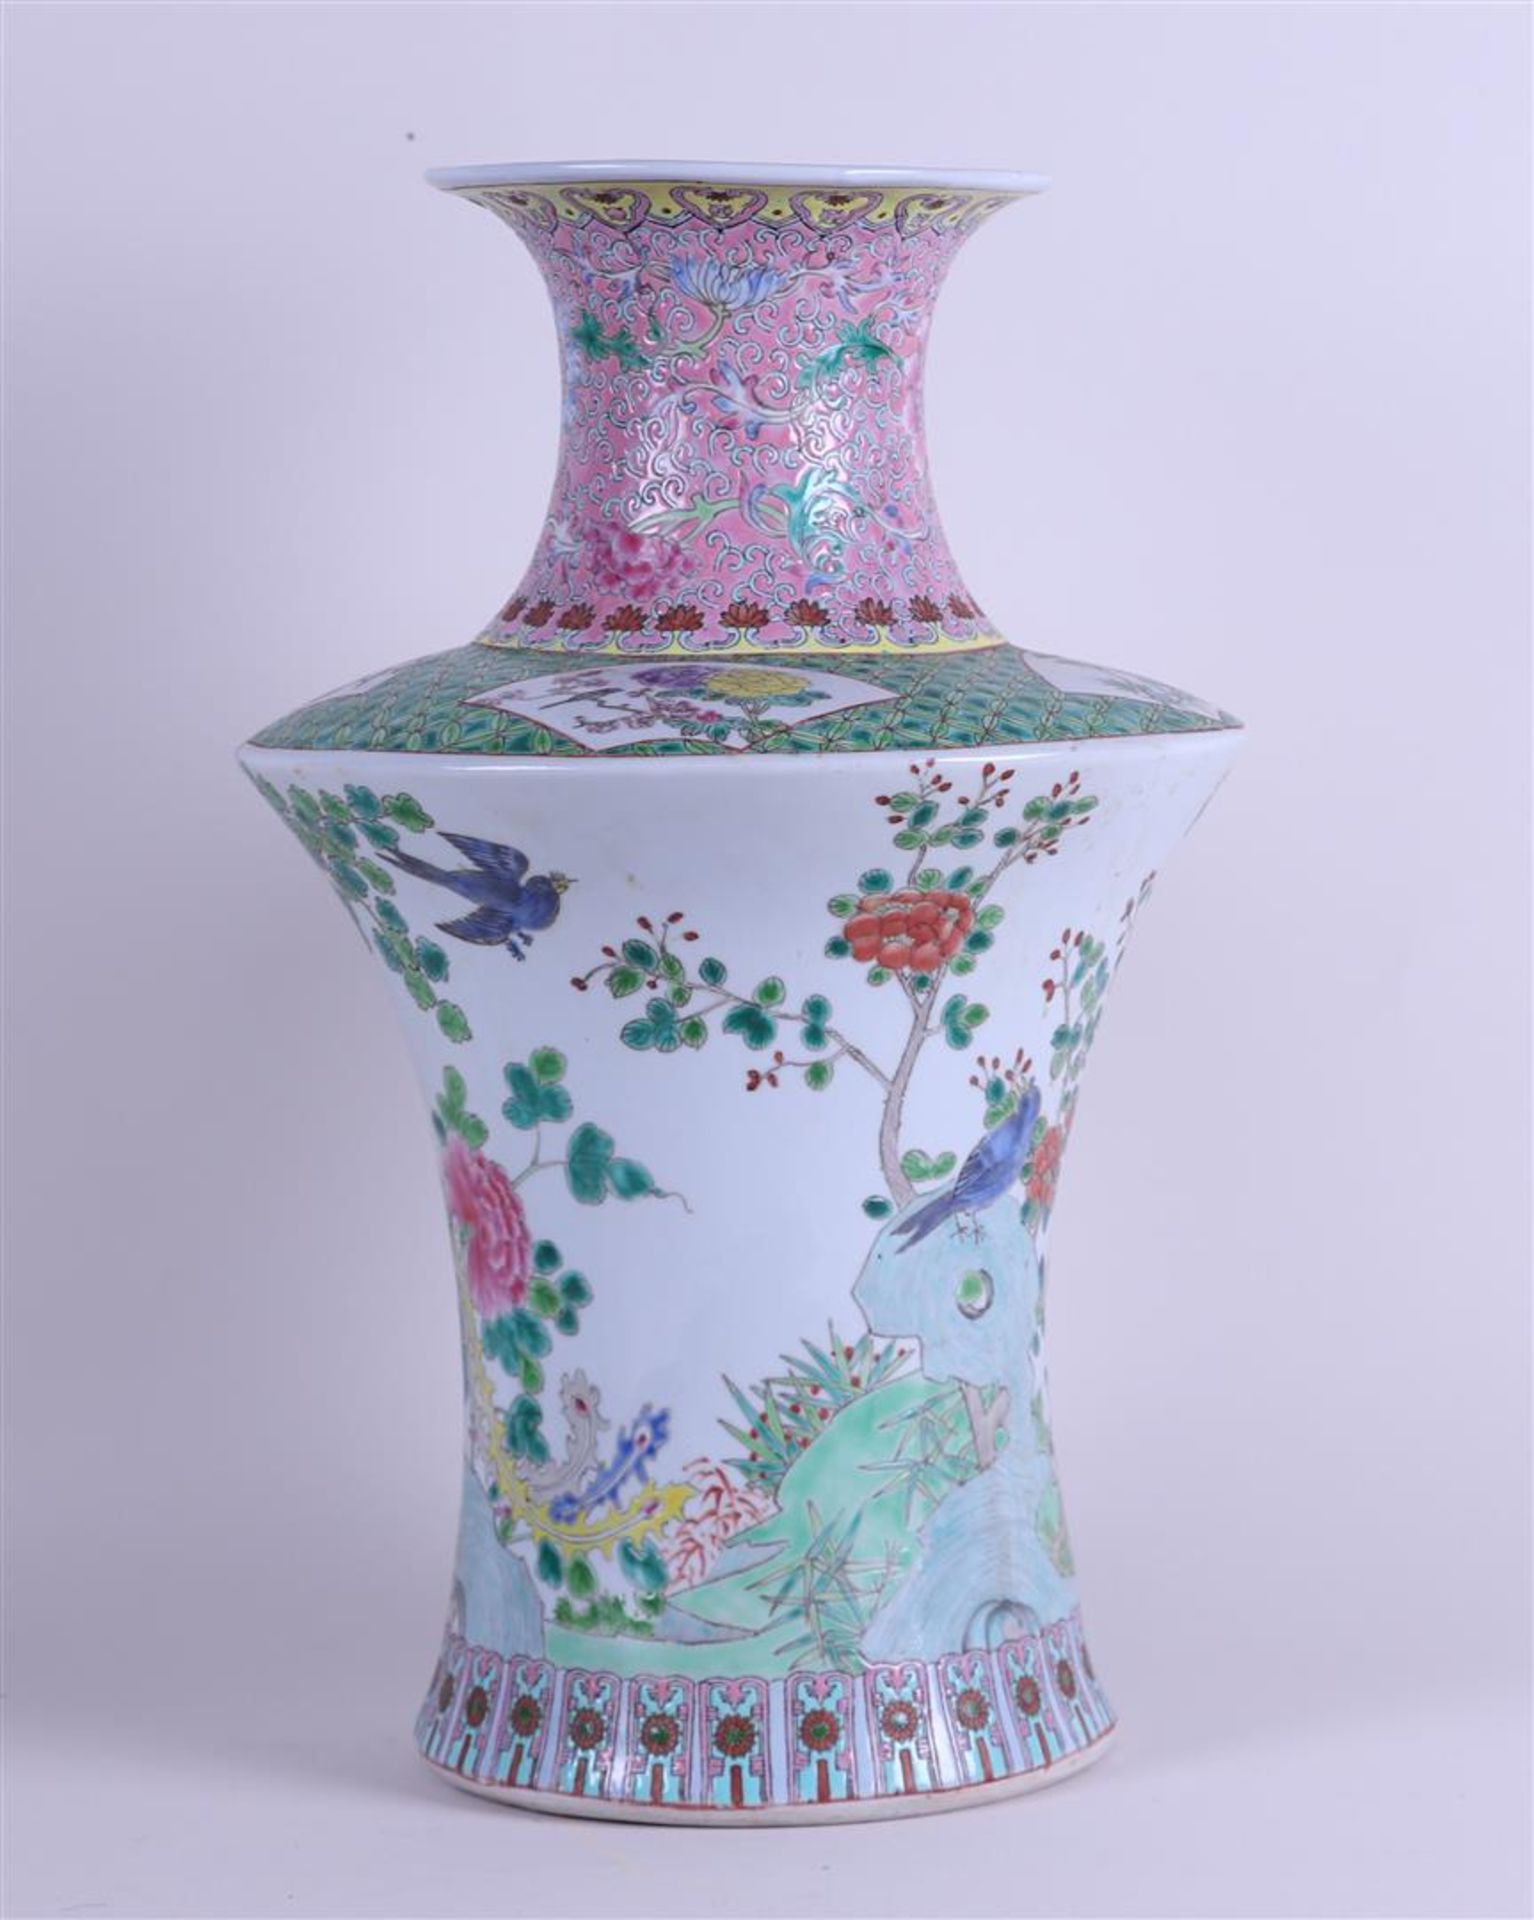 A porcelain Famile Rose vase decorated with various birds and flowers. China, 20th century.